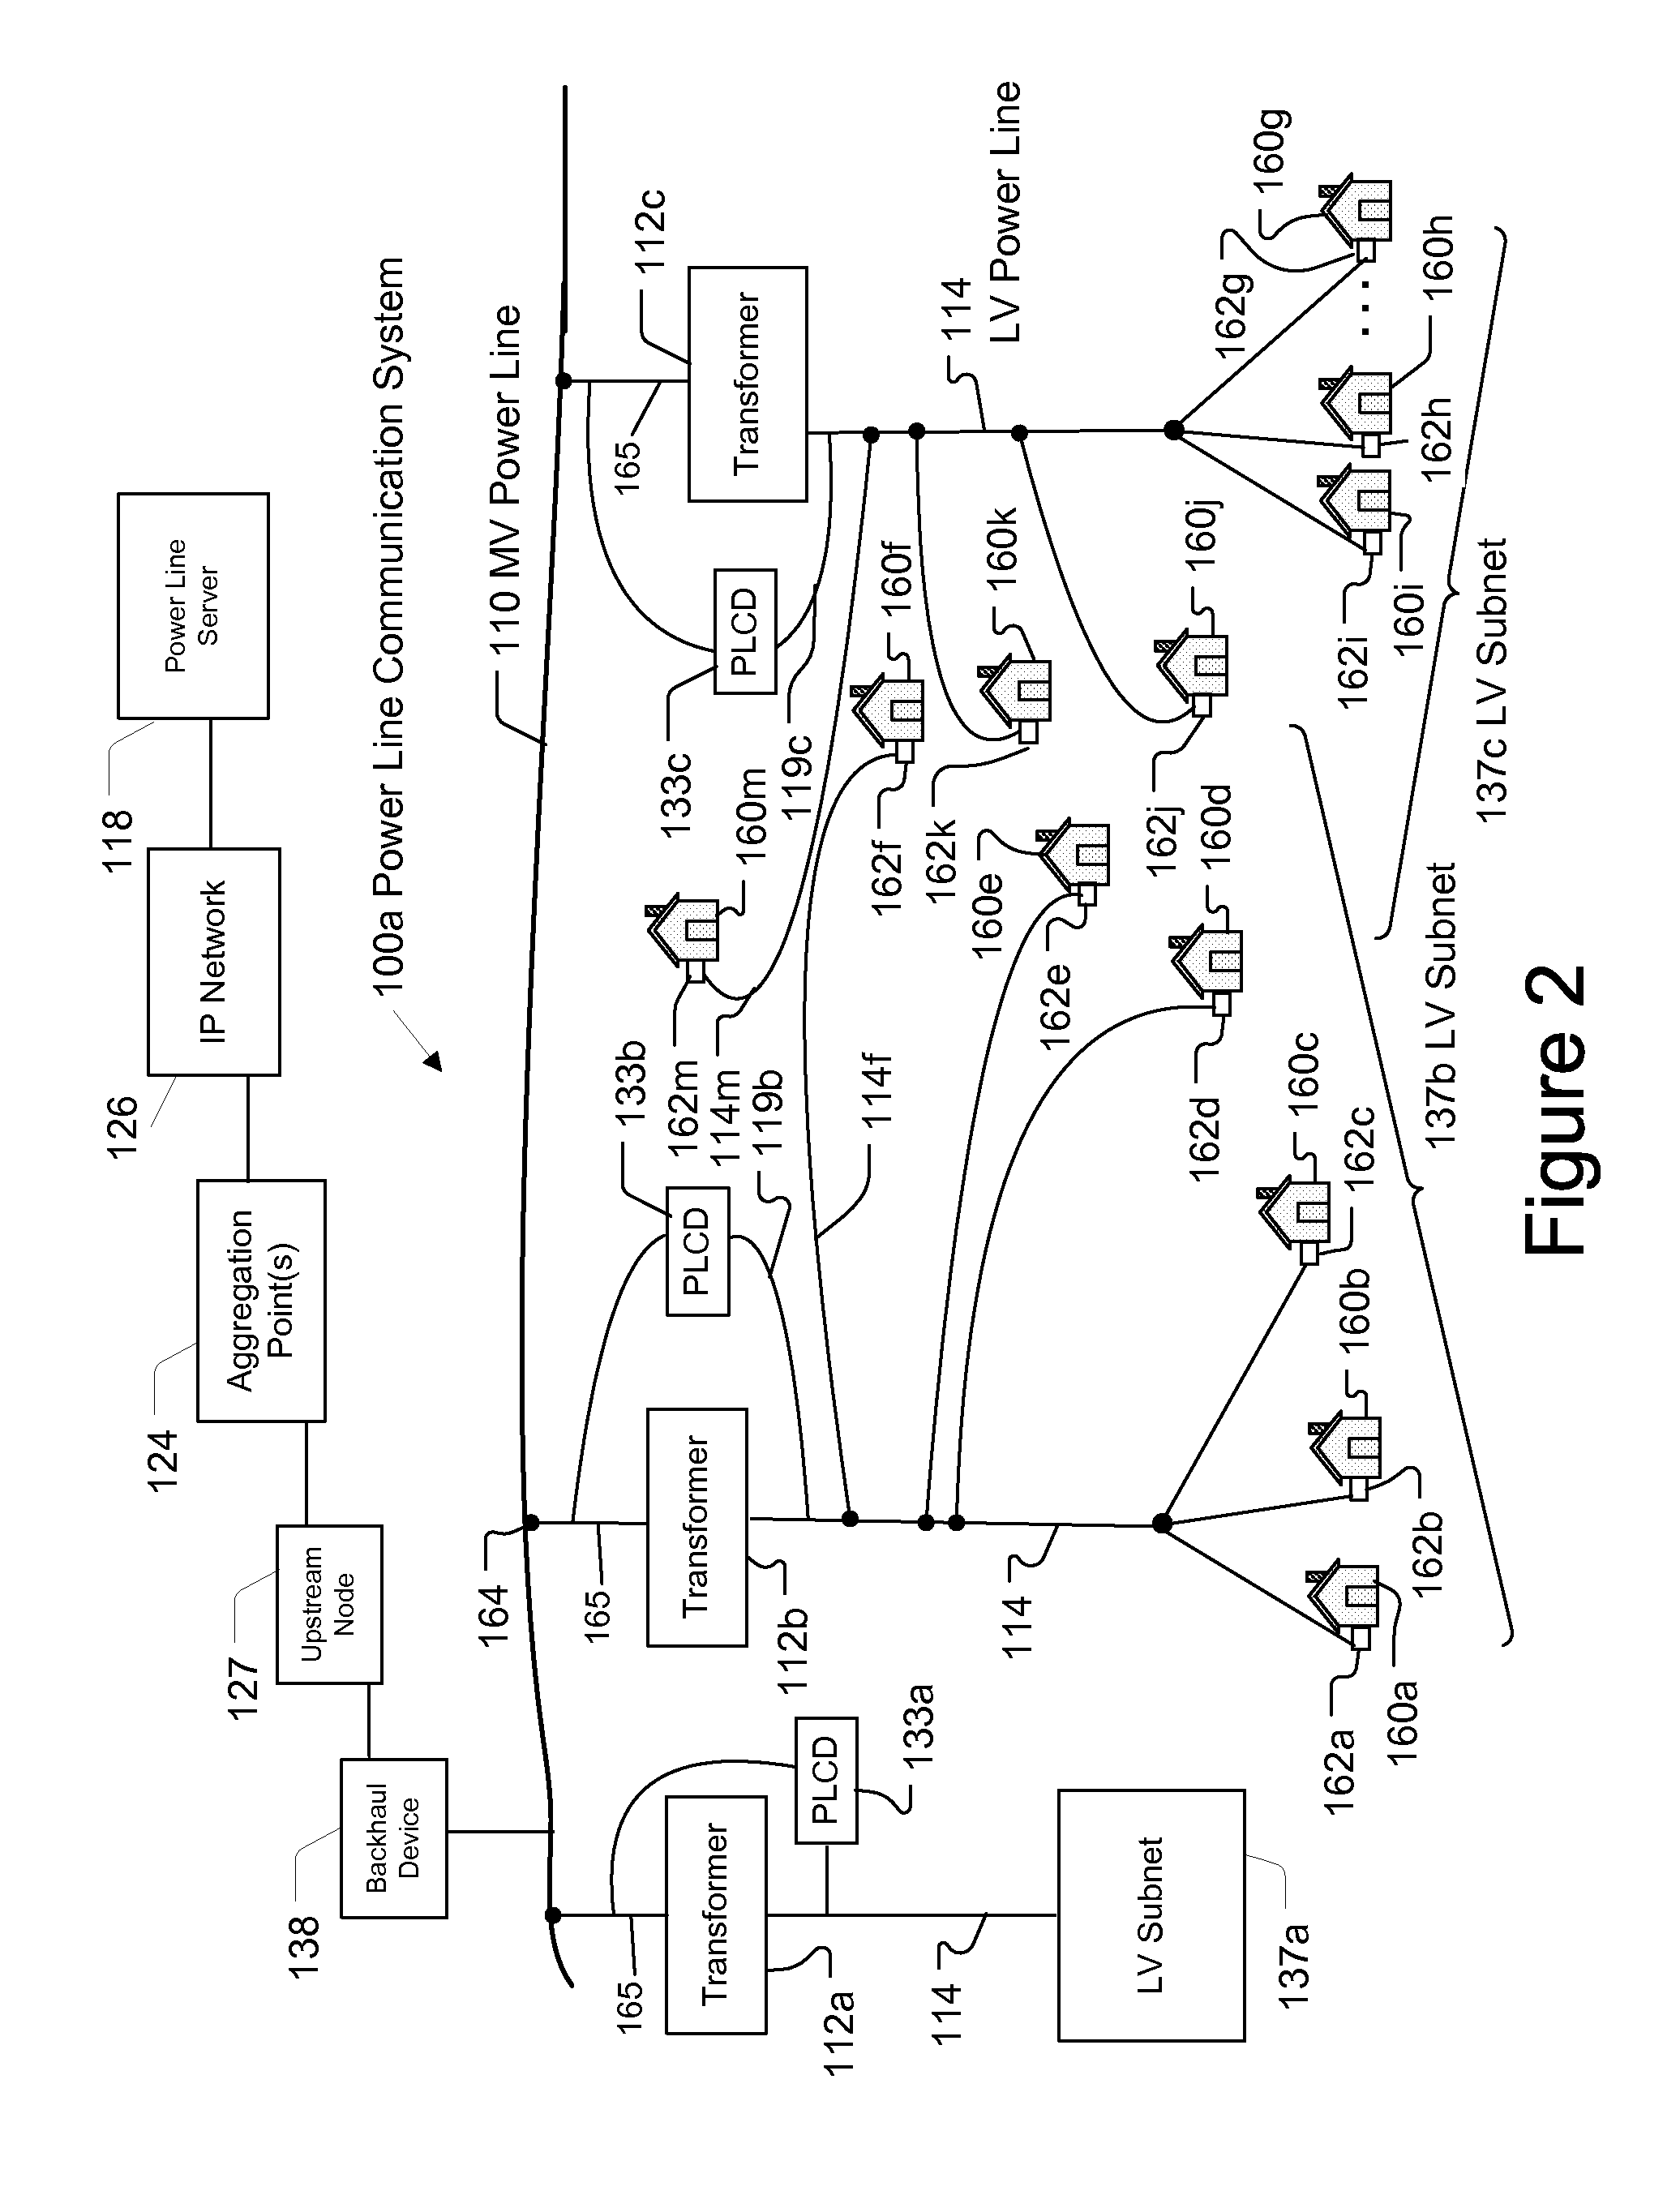 System and Method for Establishing Communications with an Electronic Meter